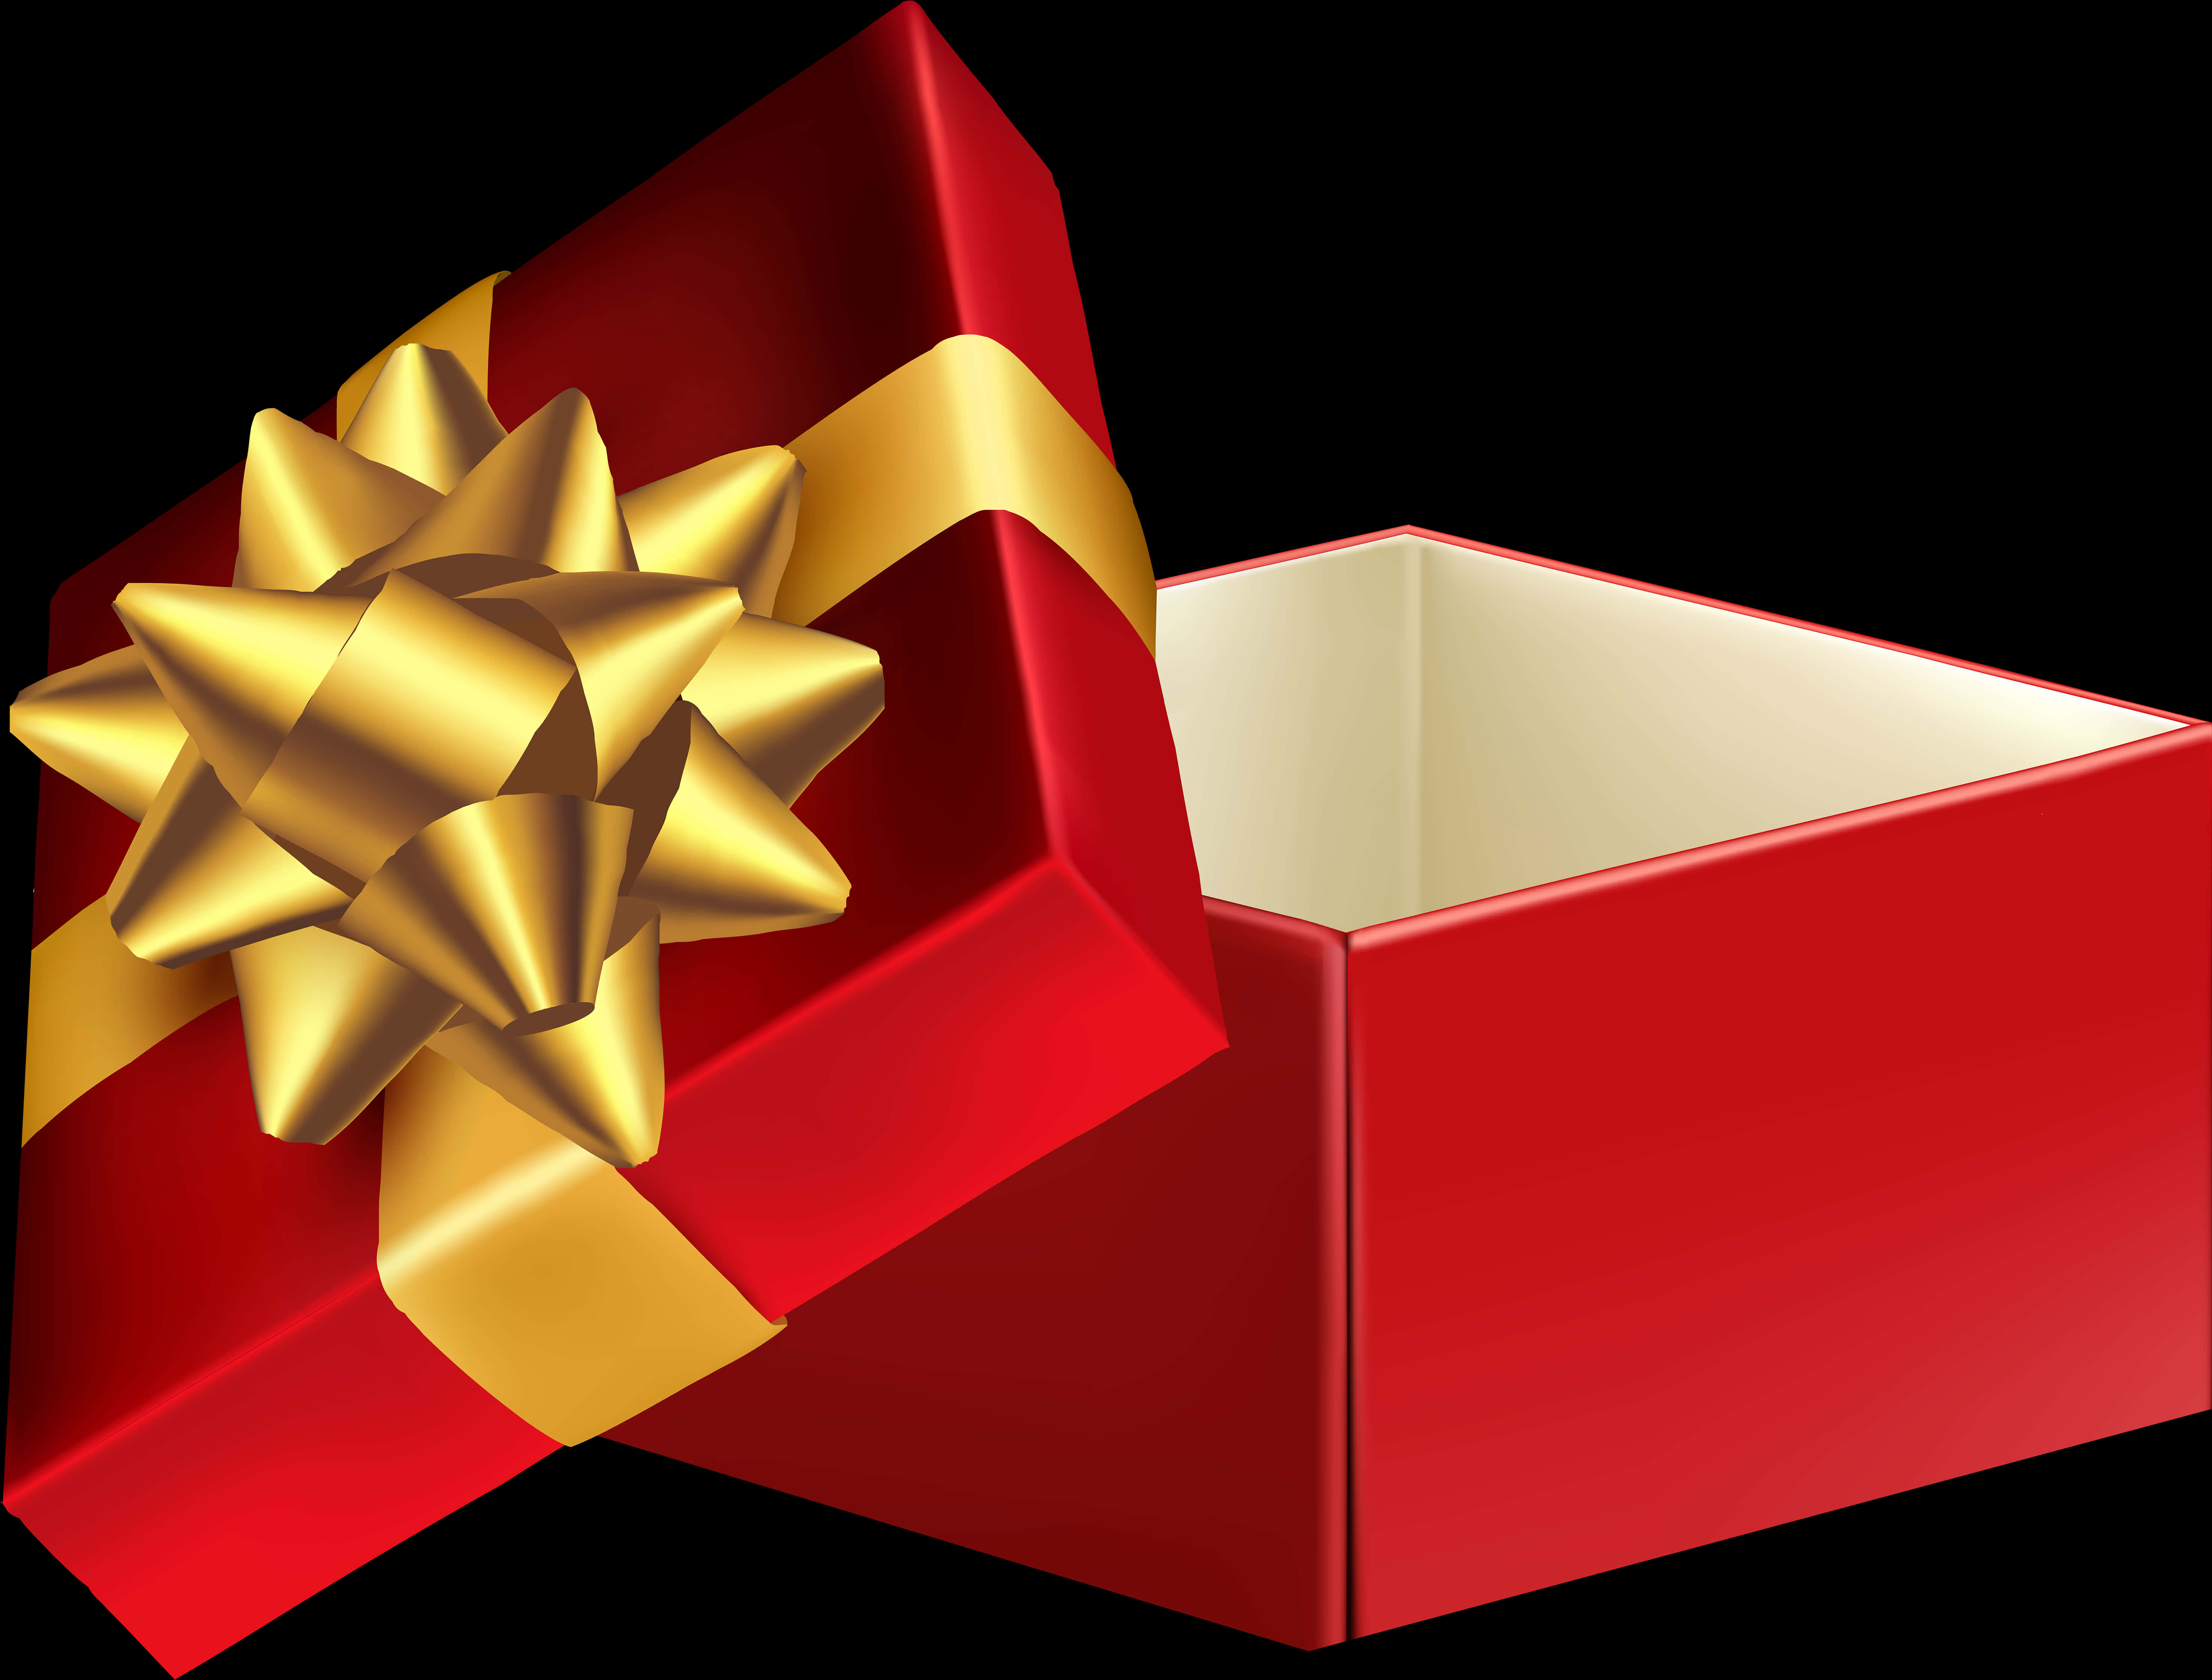 A Red Box With A Gold Bow